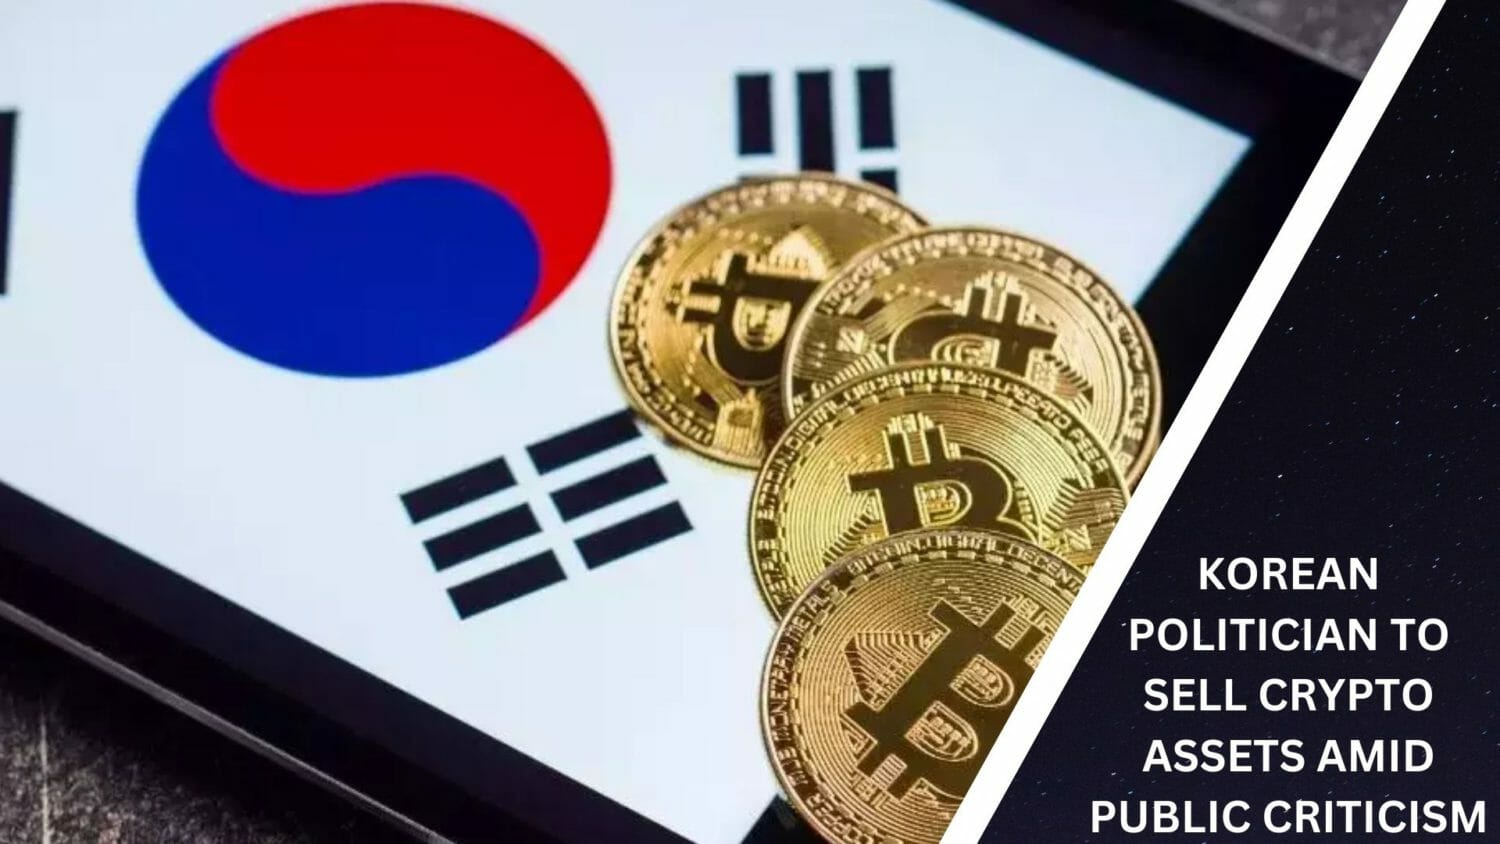 Korean Politician To Sell Crypto Assets Amid Public Criticism